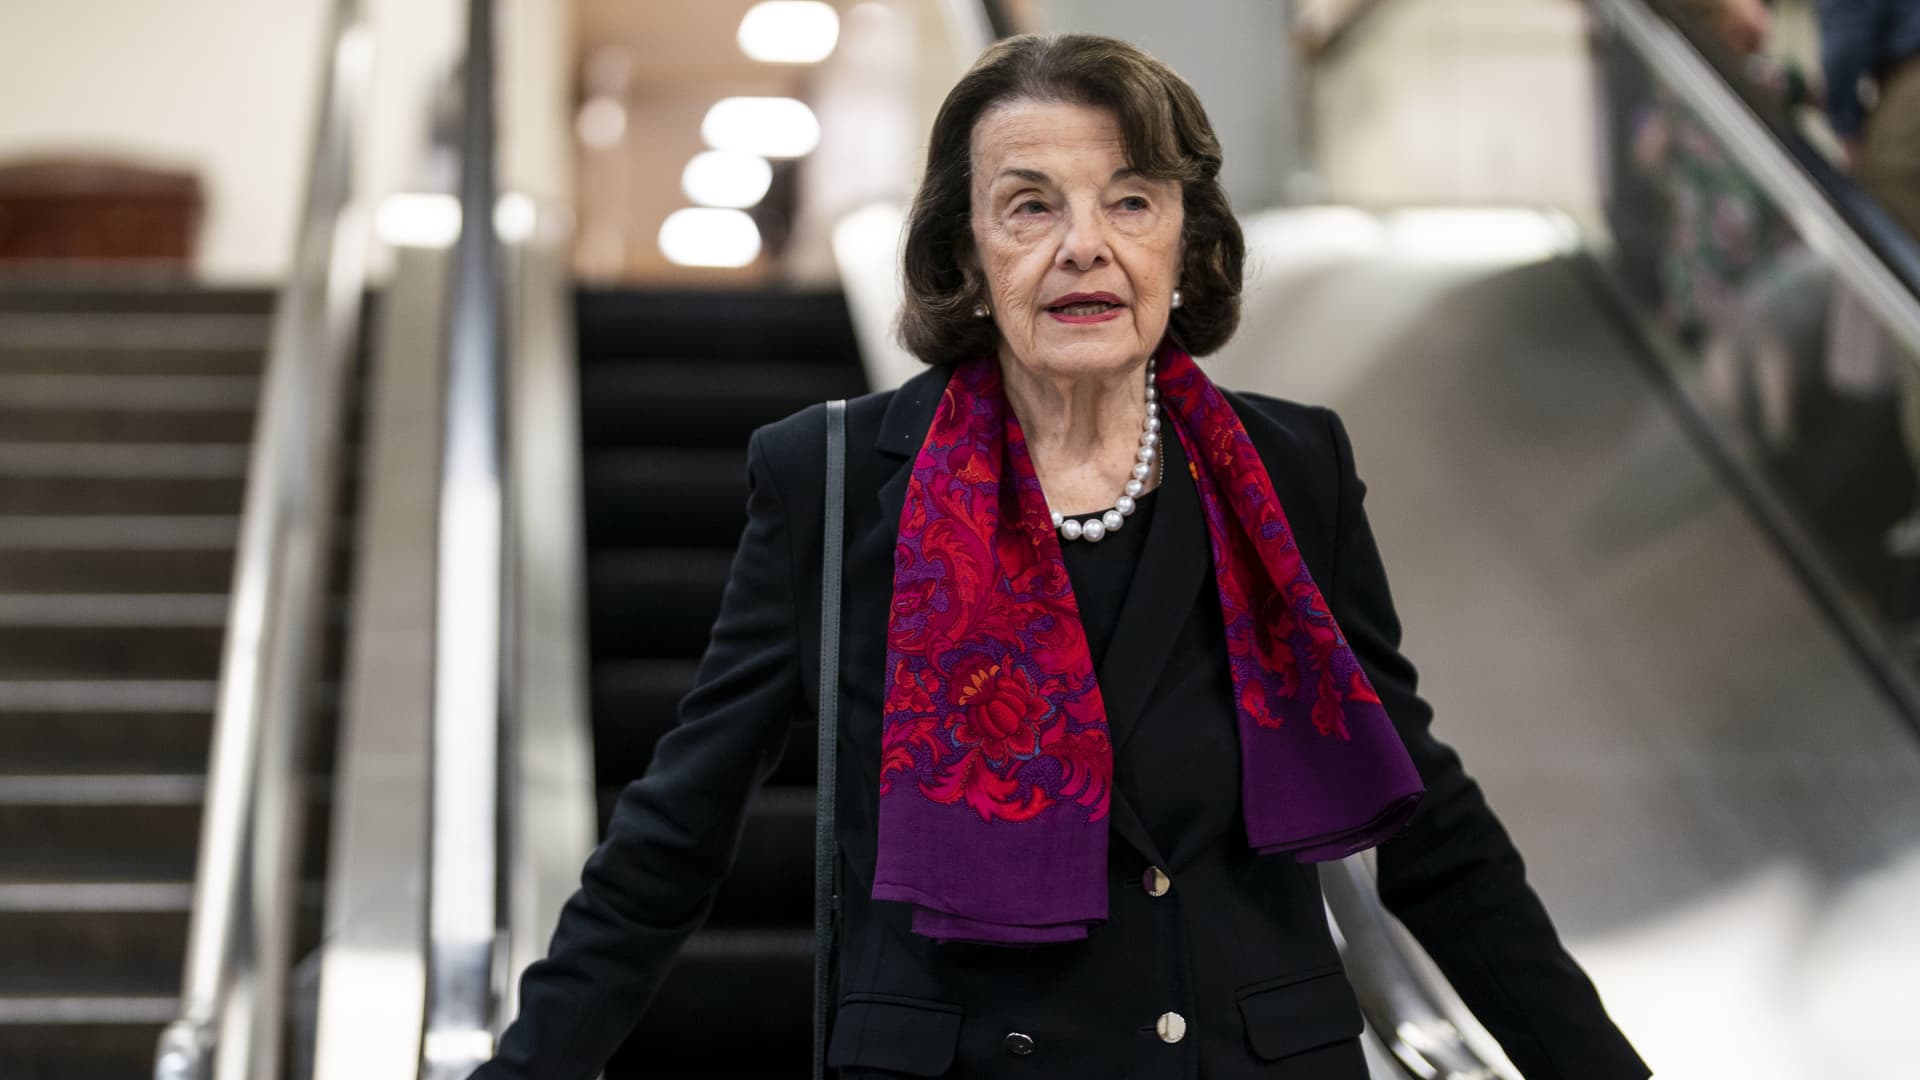 Sen. Dianne Feinstein, D-Calif., in the Senate subway on Capitol Hill in Washington, D.C., May 11, 2022.